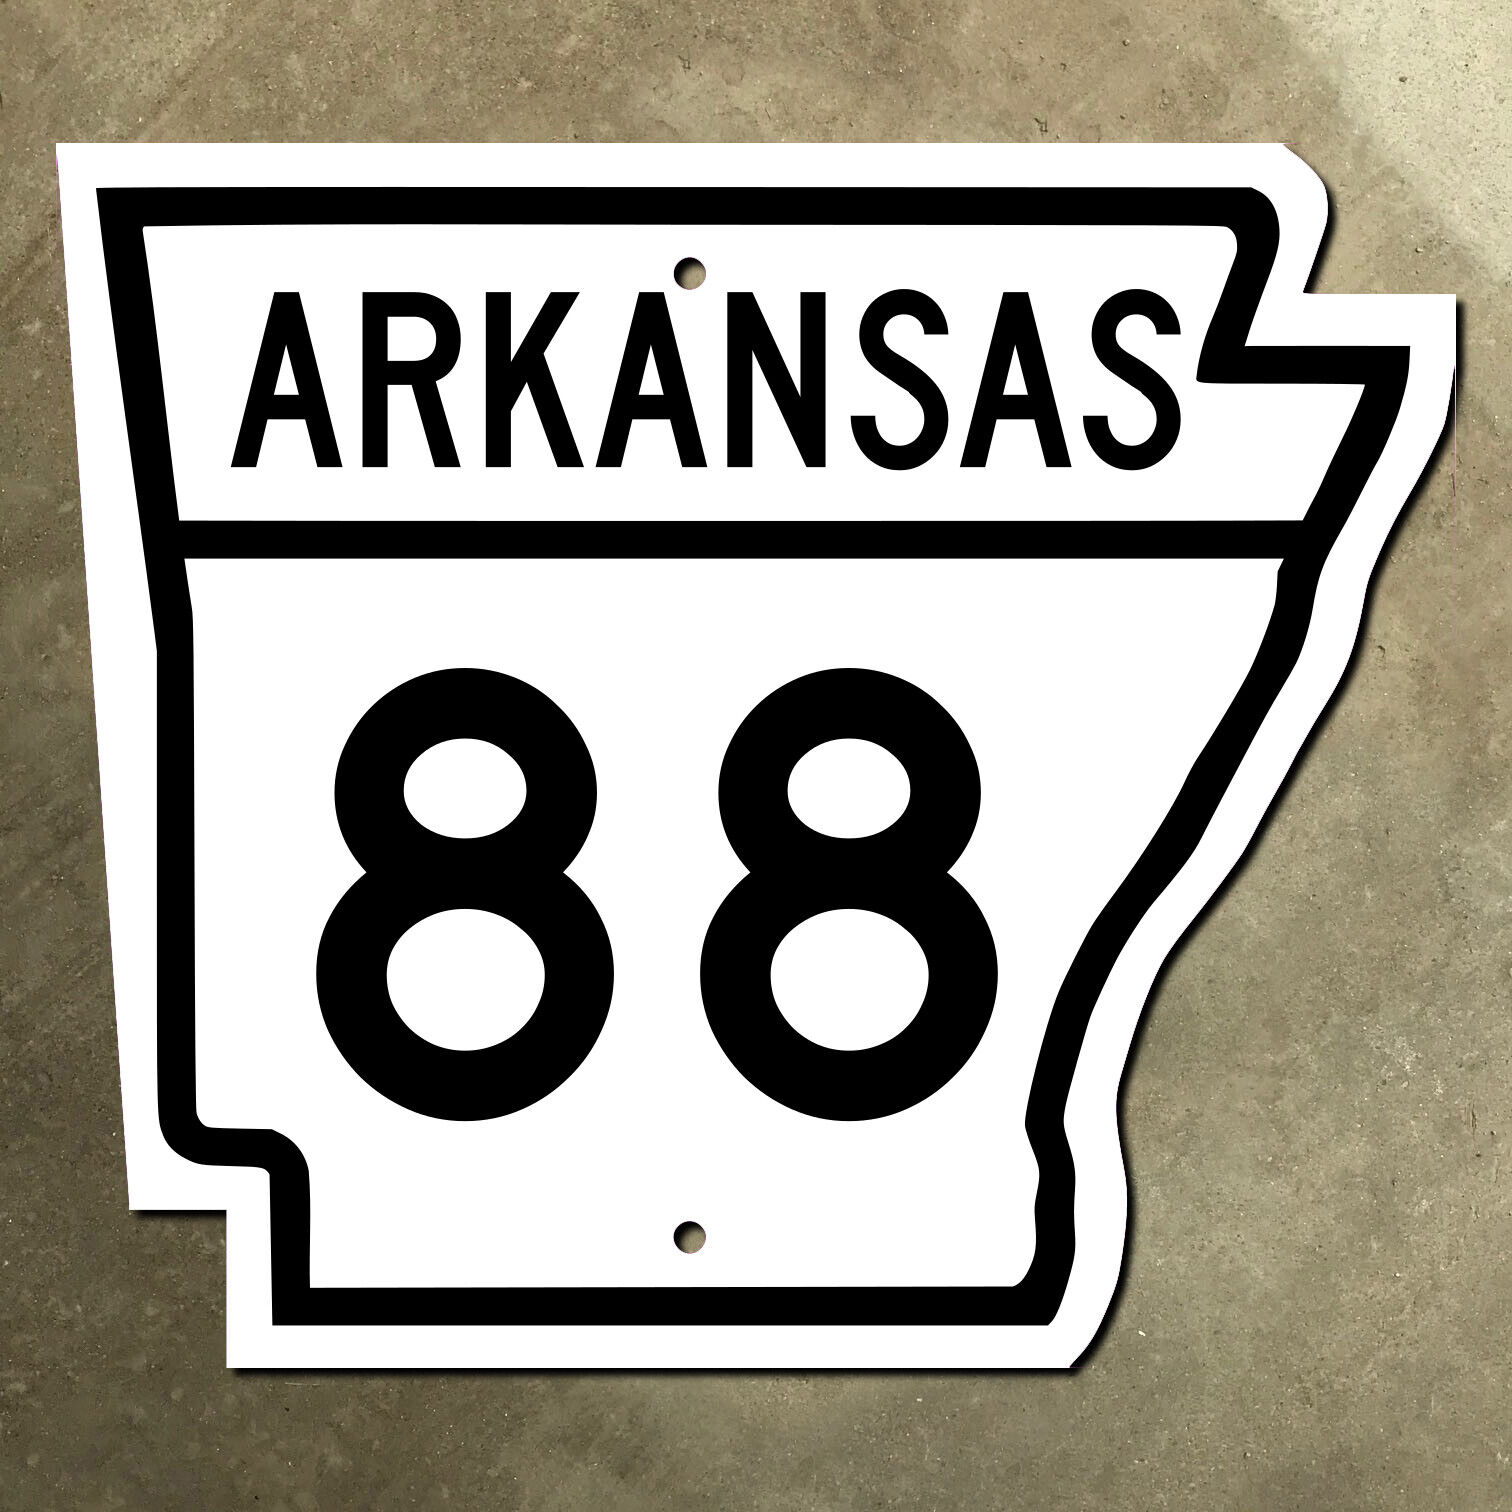 Arkansas state route 88 highway marker road sign 1950s 1960s